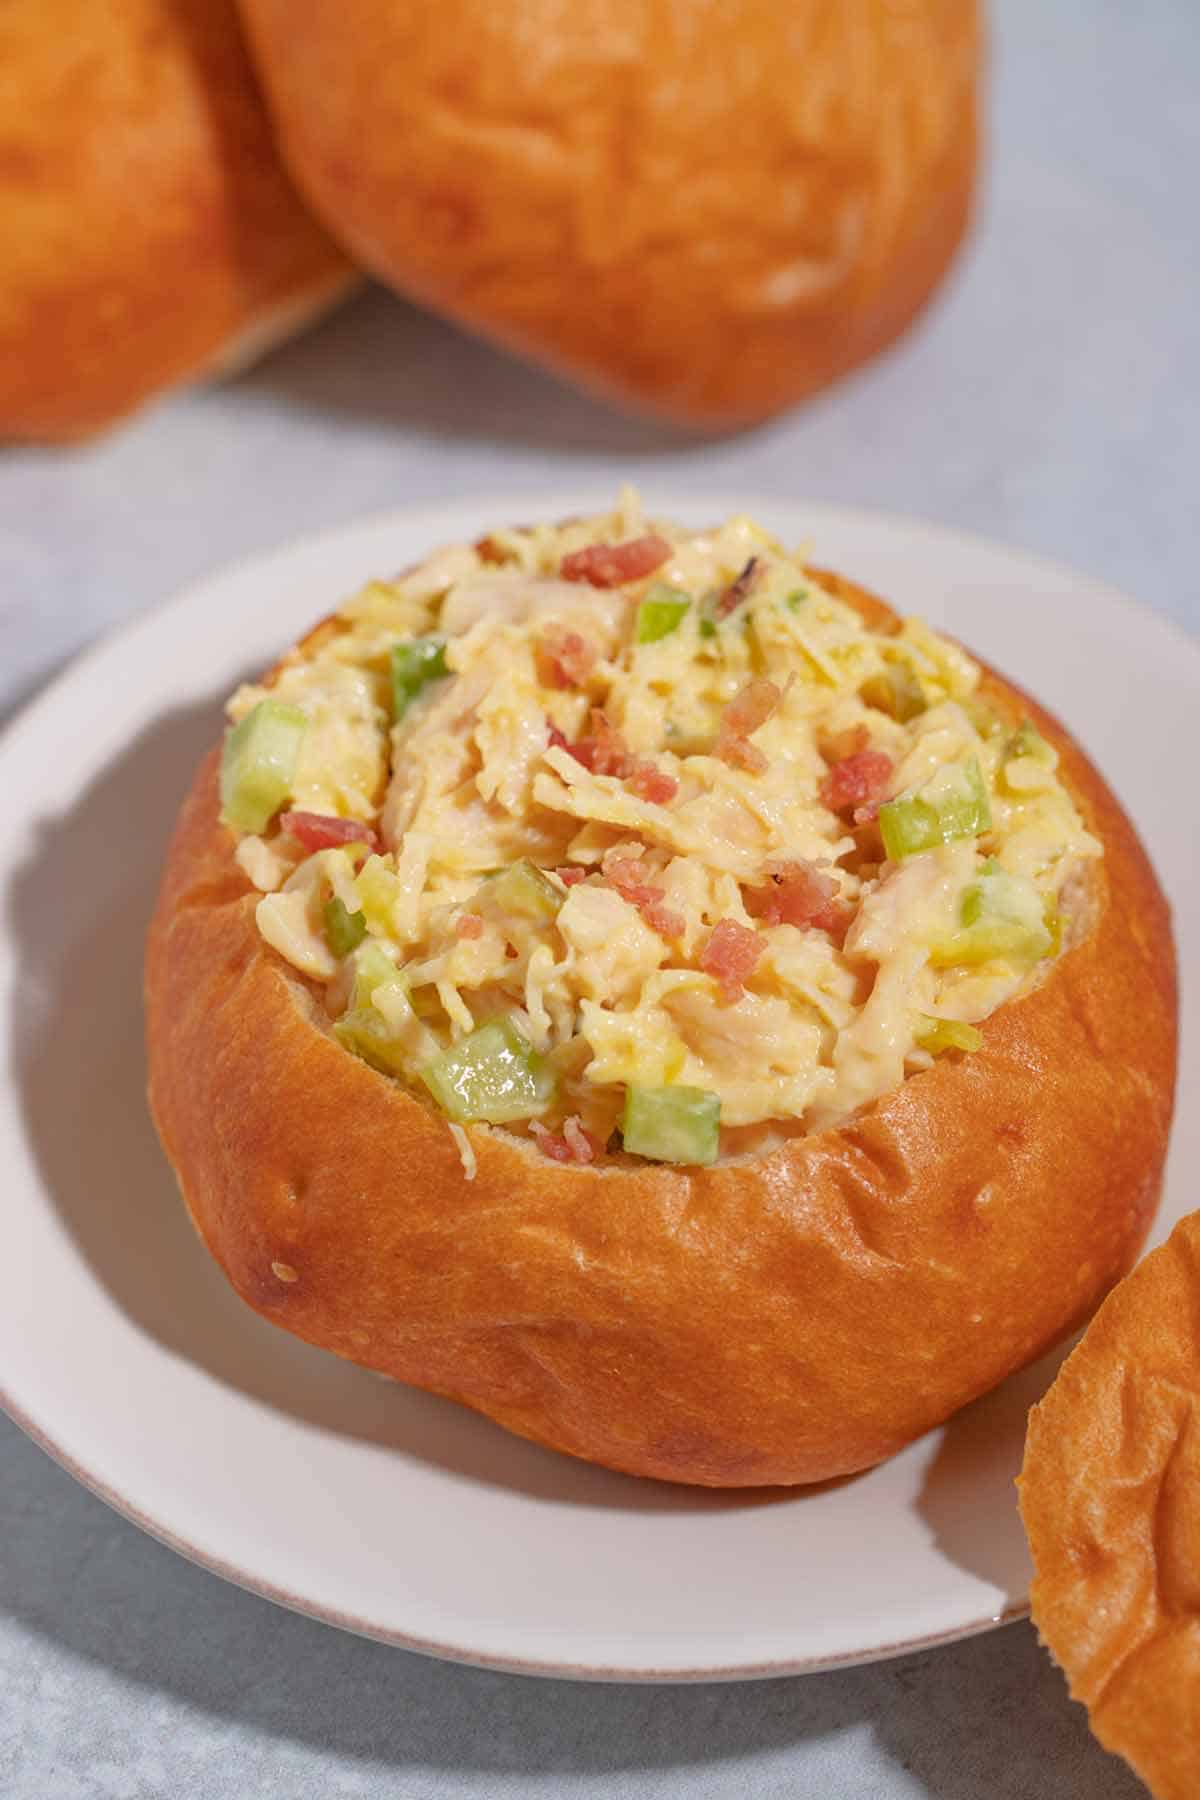 A bread bowl made out of a roll that has been hollowed out with chicken salad inside.